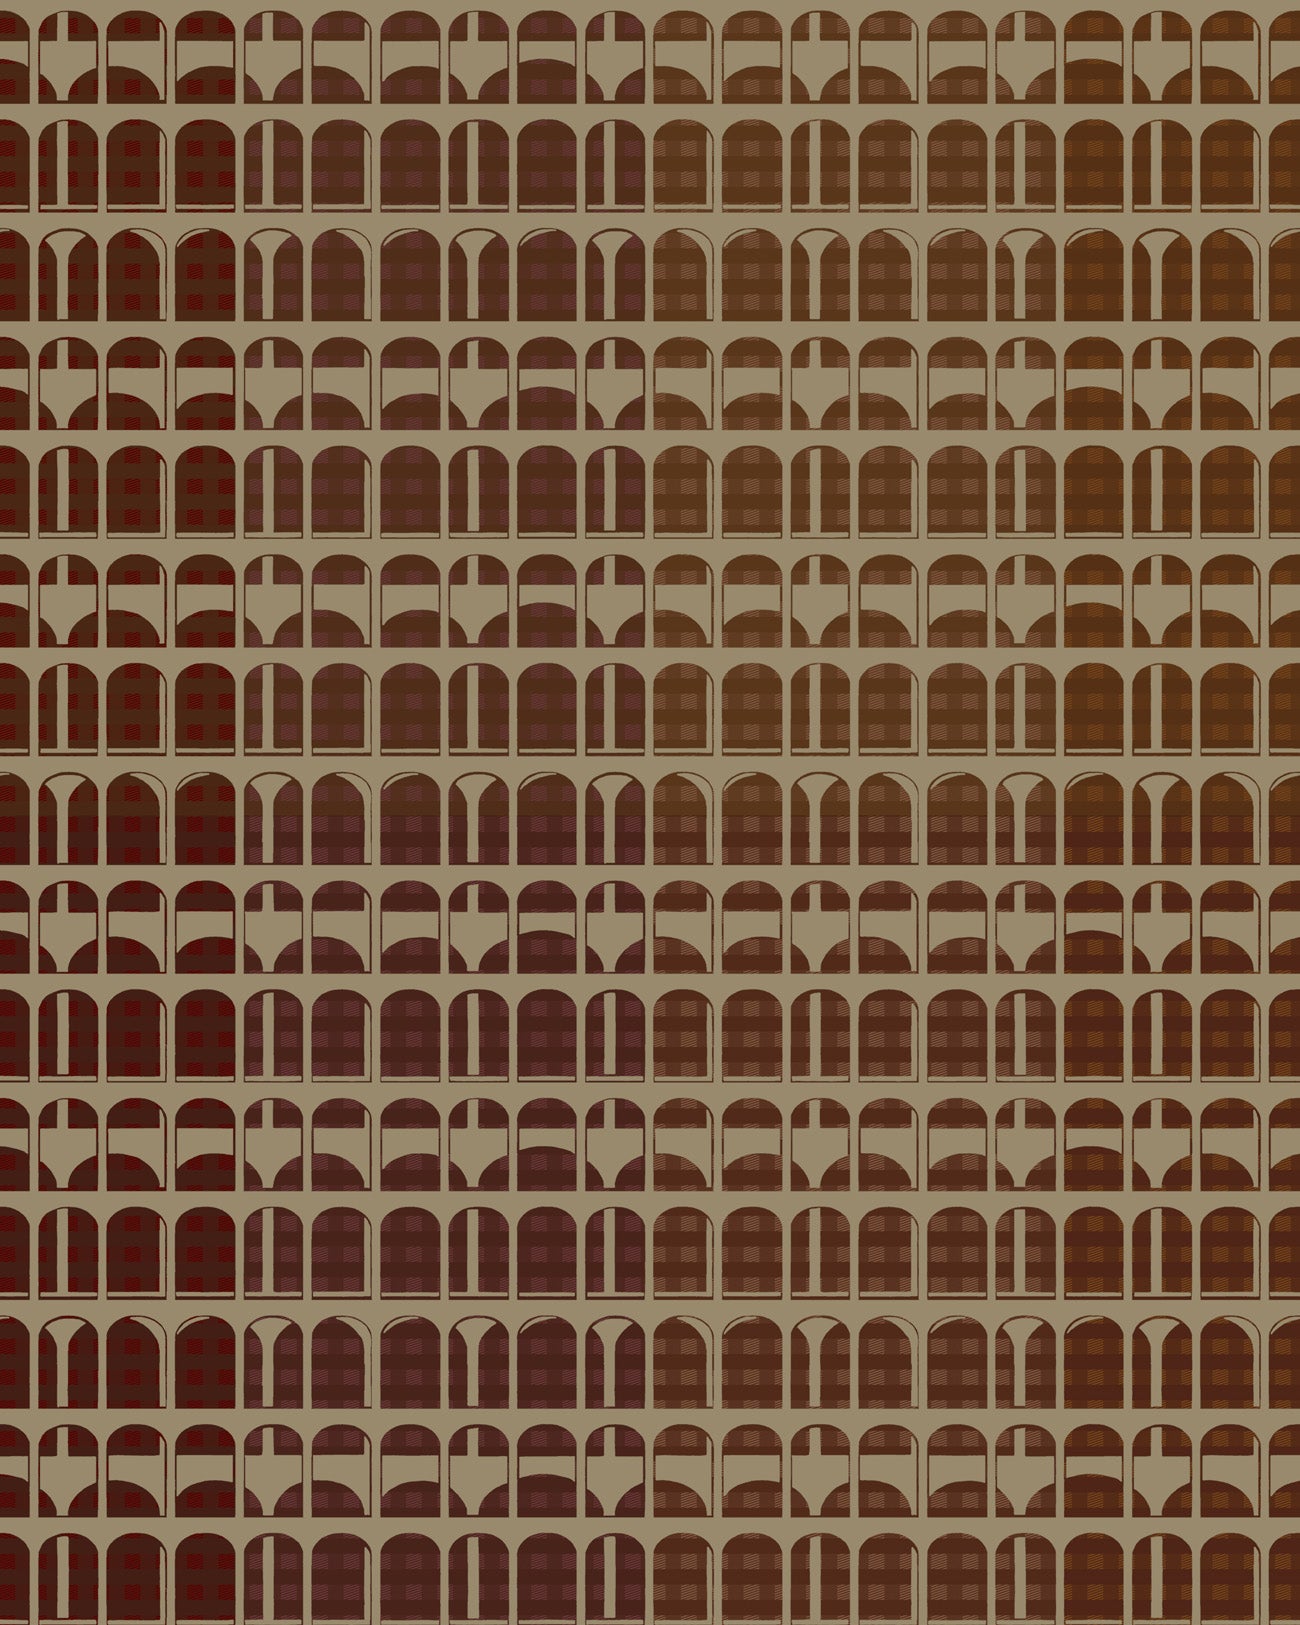 Graphic pattern wallpaper Profhome VD219159-DI hot embossed non-woven wallpaper with graphic design and metallic accents red brown gold 5.33 m2